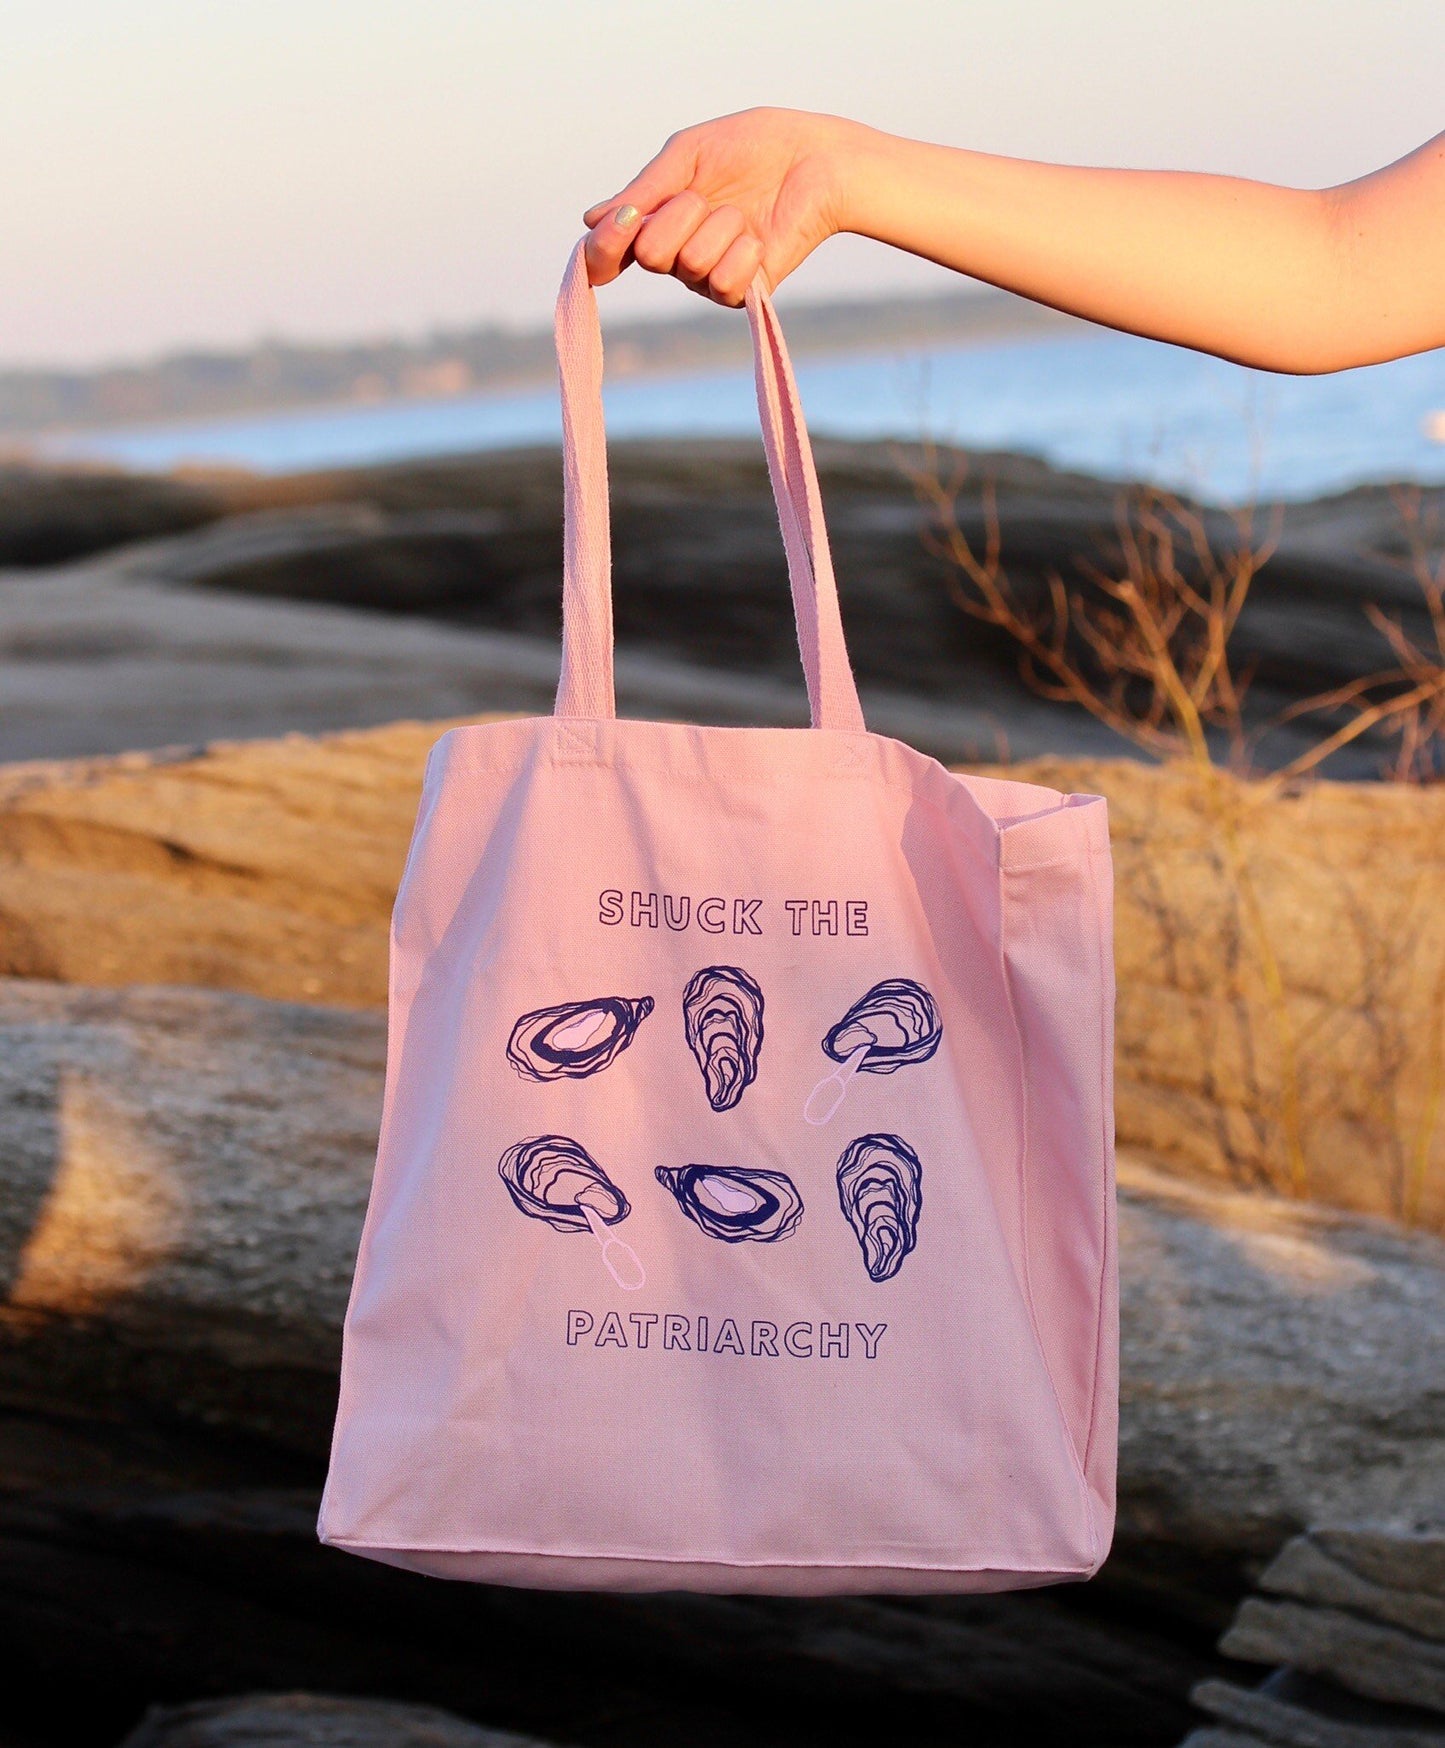 A woman holds a pink tote that reads "Shuck the Patriarchy" in block letters